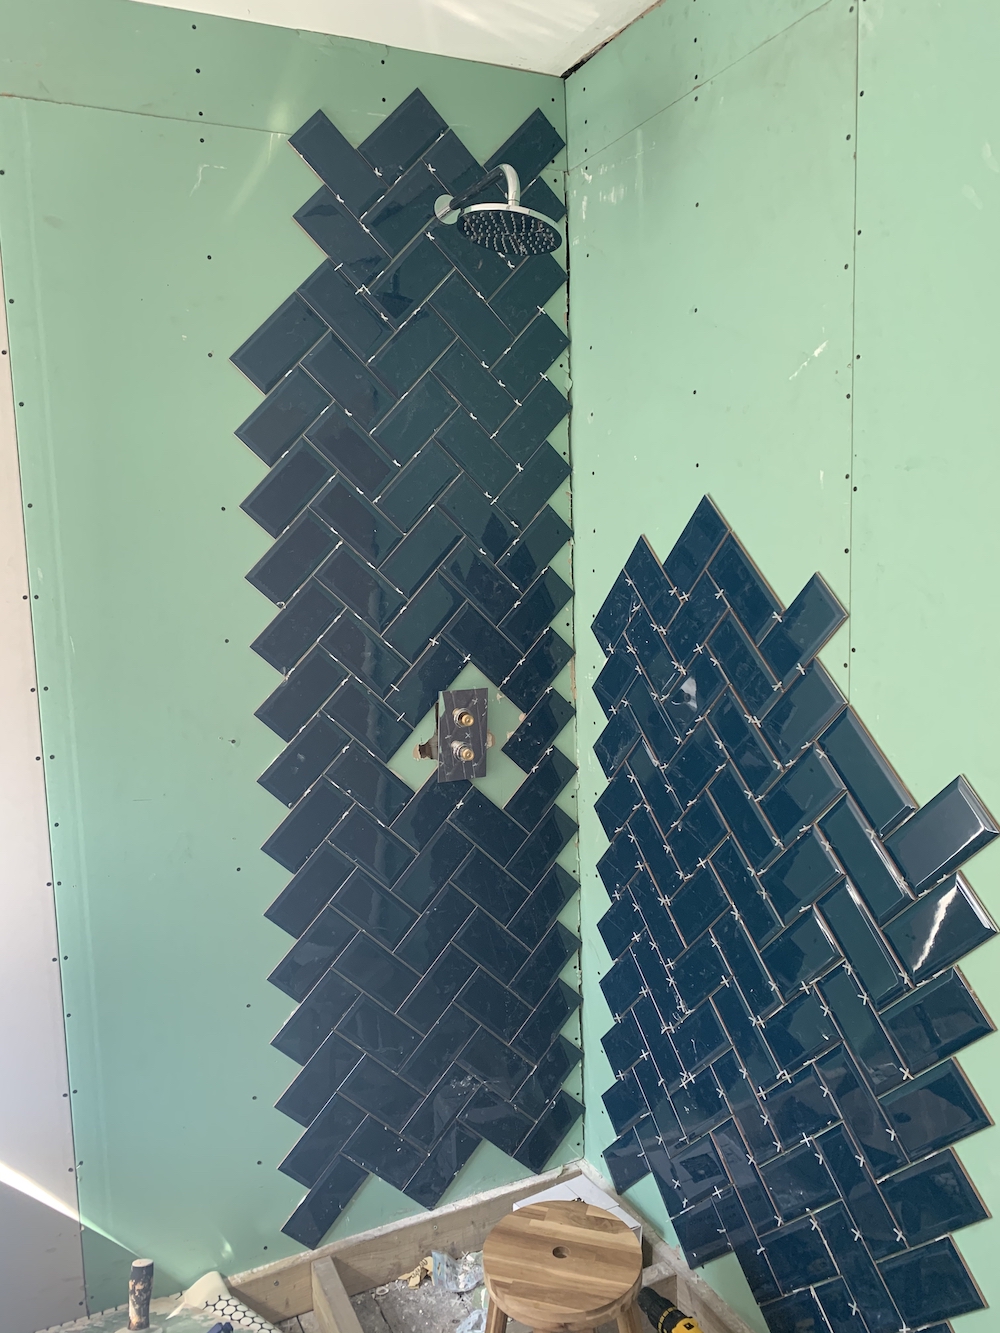 Starting the herrinbone tile pattern with shower head installed